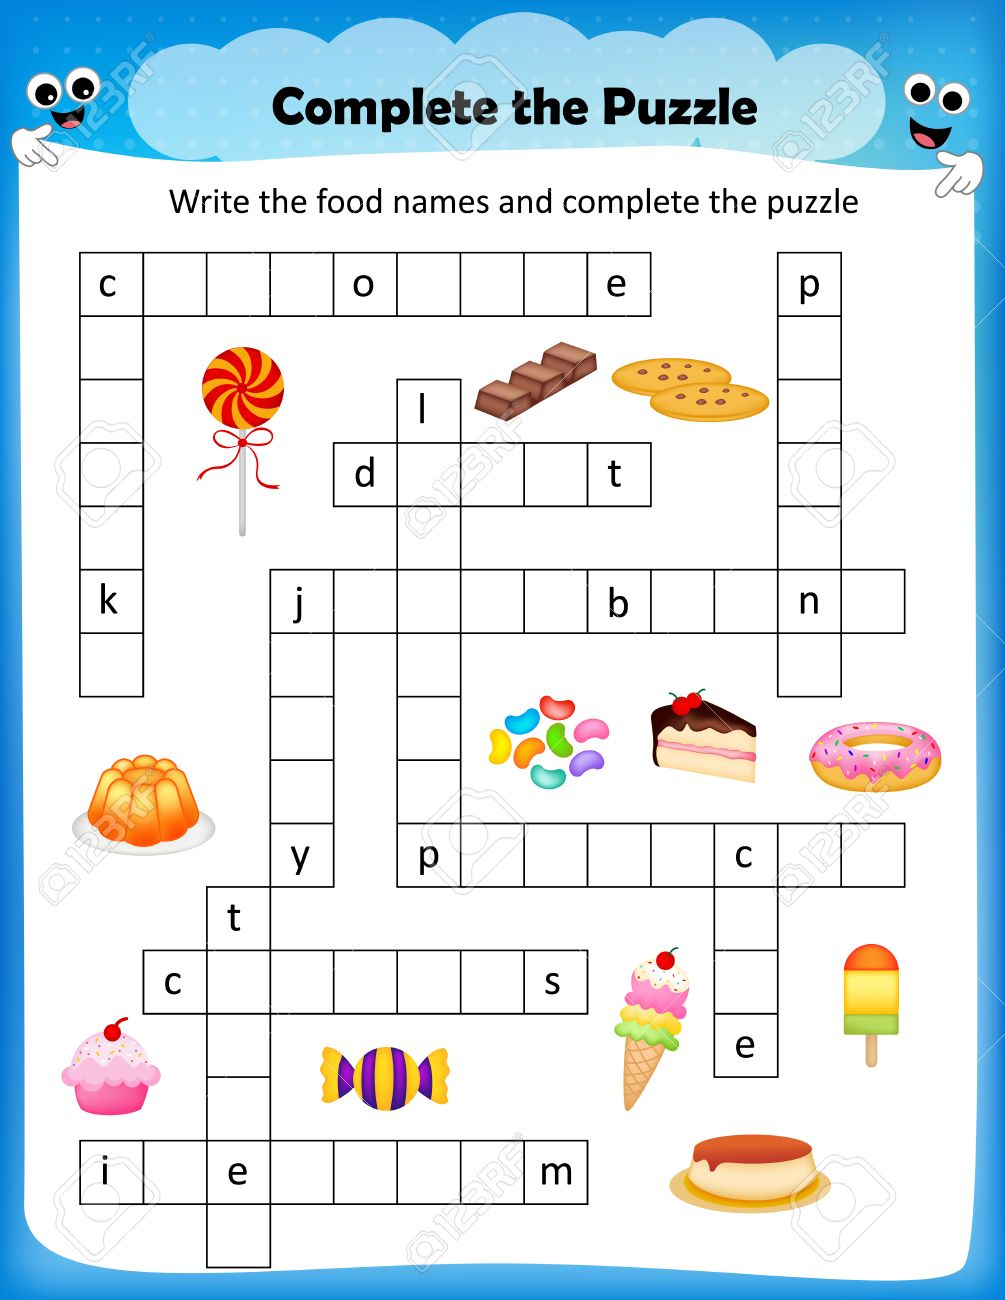 Worksheet - Complete The Crossword Puzzle Sweets Worksheet For - Worksheet On Puzzle